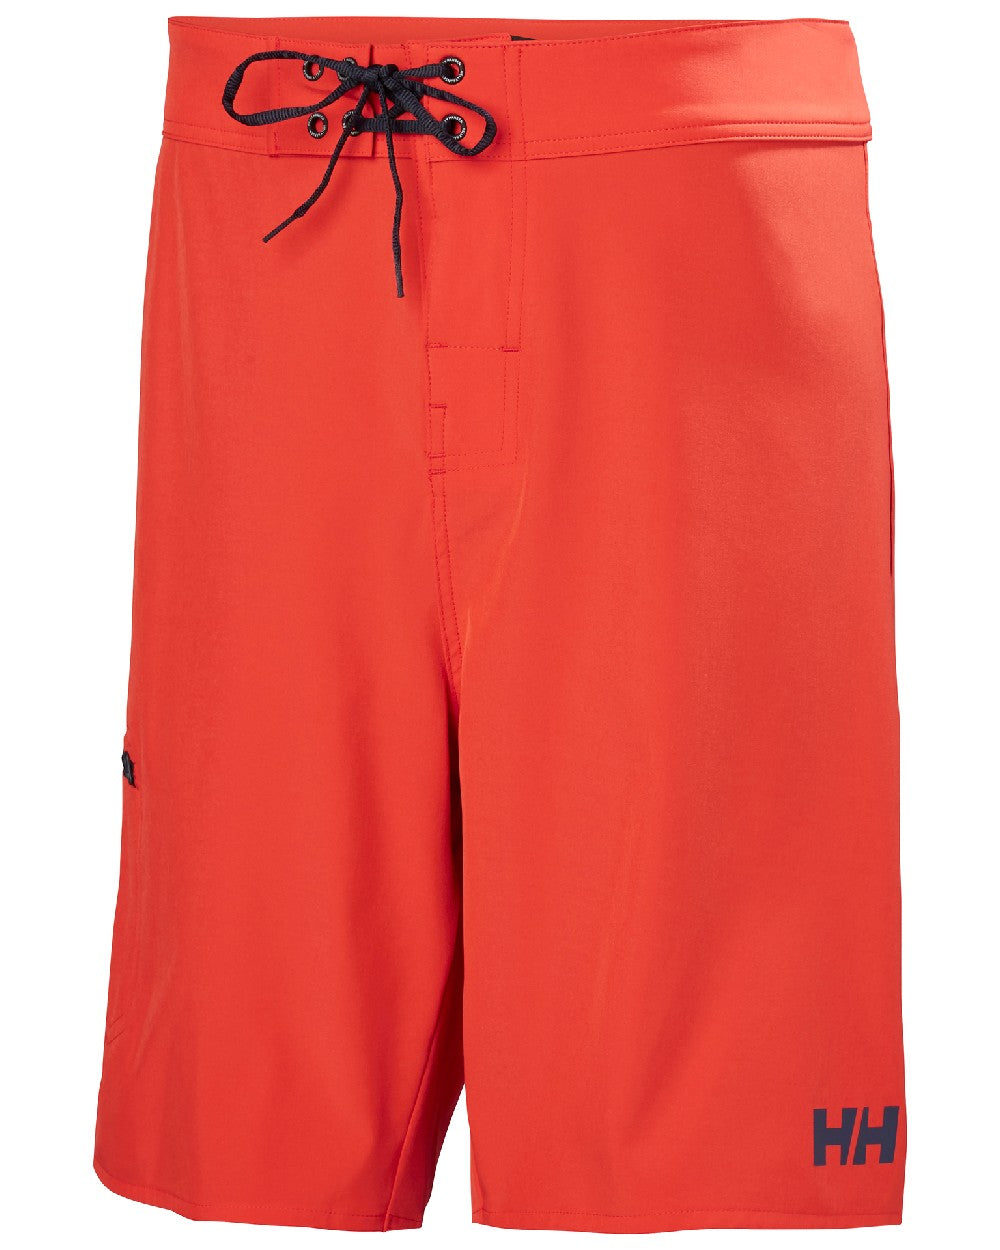 Alert Red Coloured Helly Hansen Mens HP 9 inch Board Shorts 3.0 on white background 